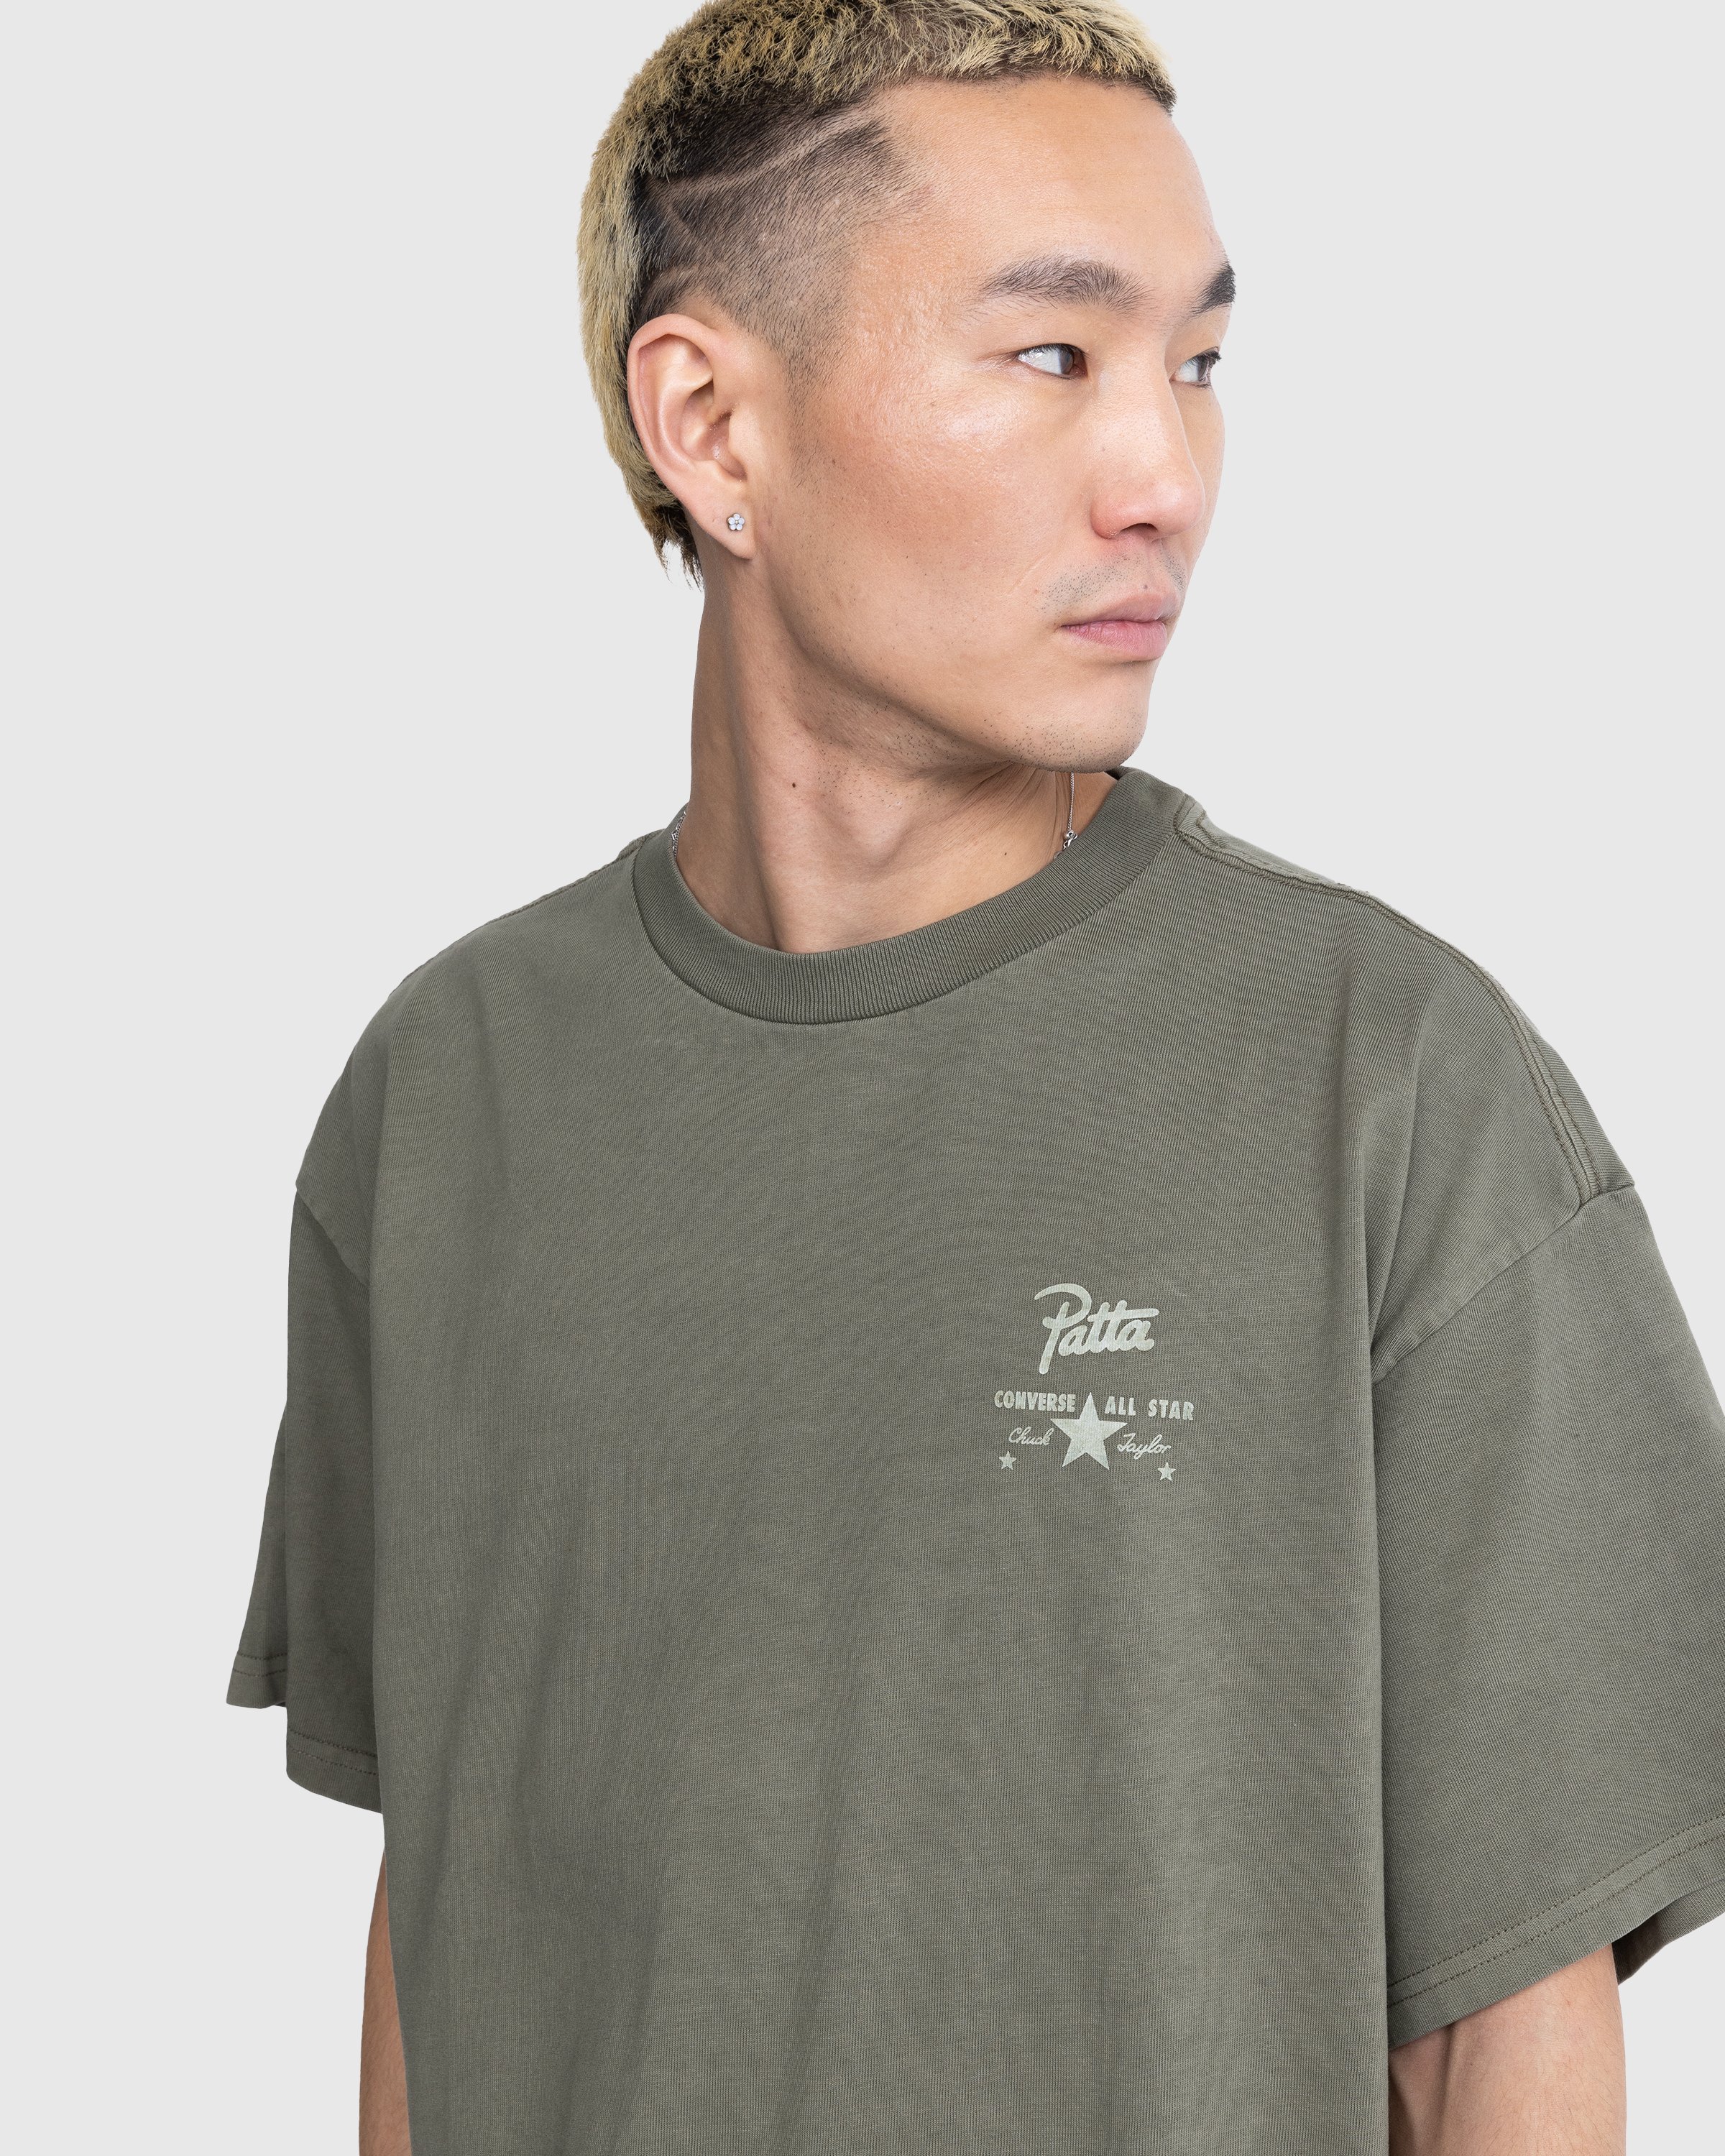 Patta x Converse - Tee Burnt Olive - Clothing - Brown - Image 6